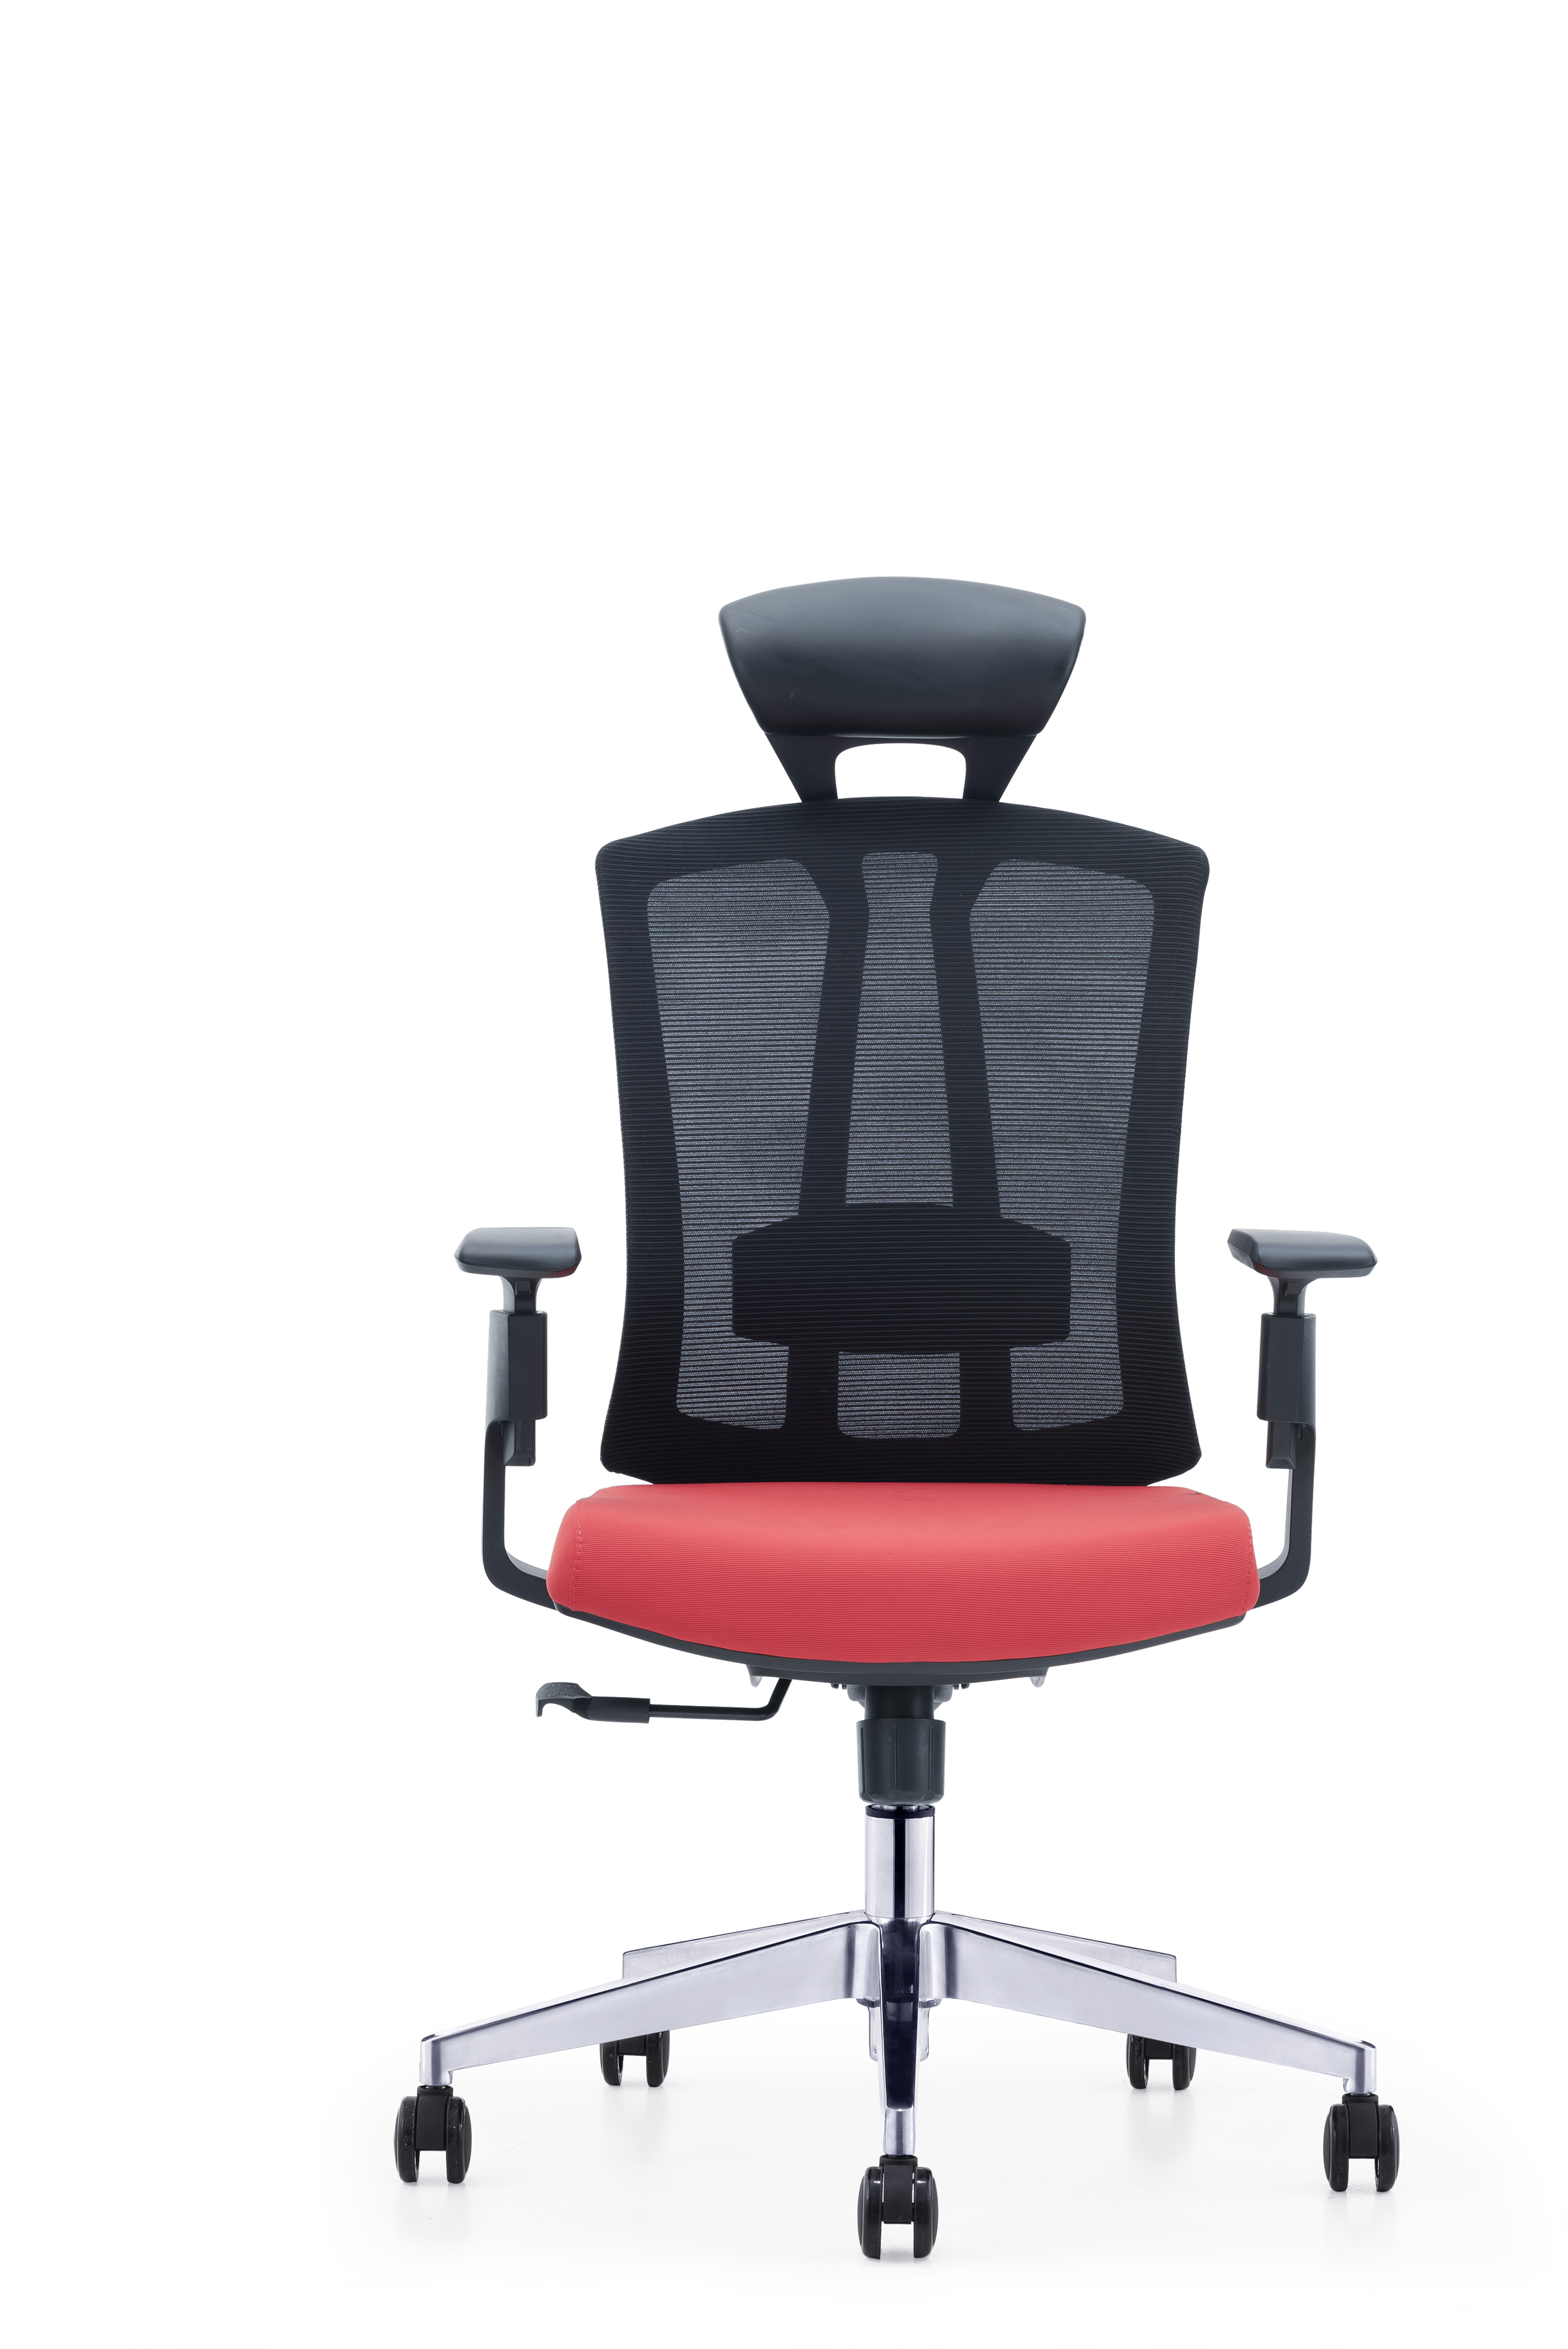 China Wholesale Best Budget Office Chair Supplier –  CH-267A – SitZone